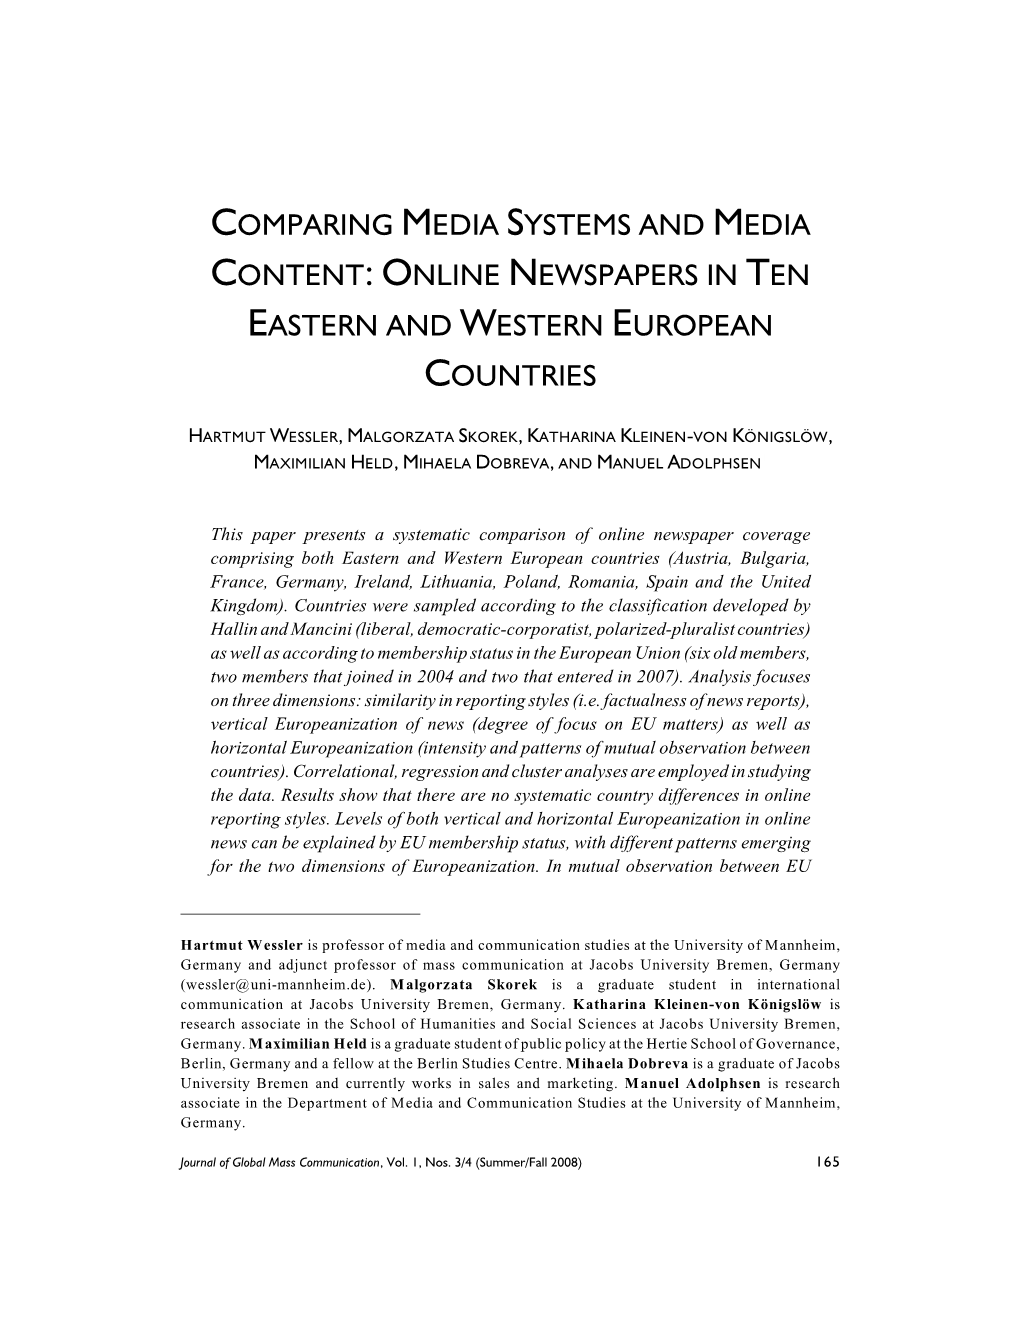 Comparing Media Systems and Media Content: Online Newspapers in Ten Eastern and Western European Countries